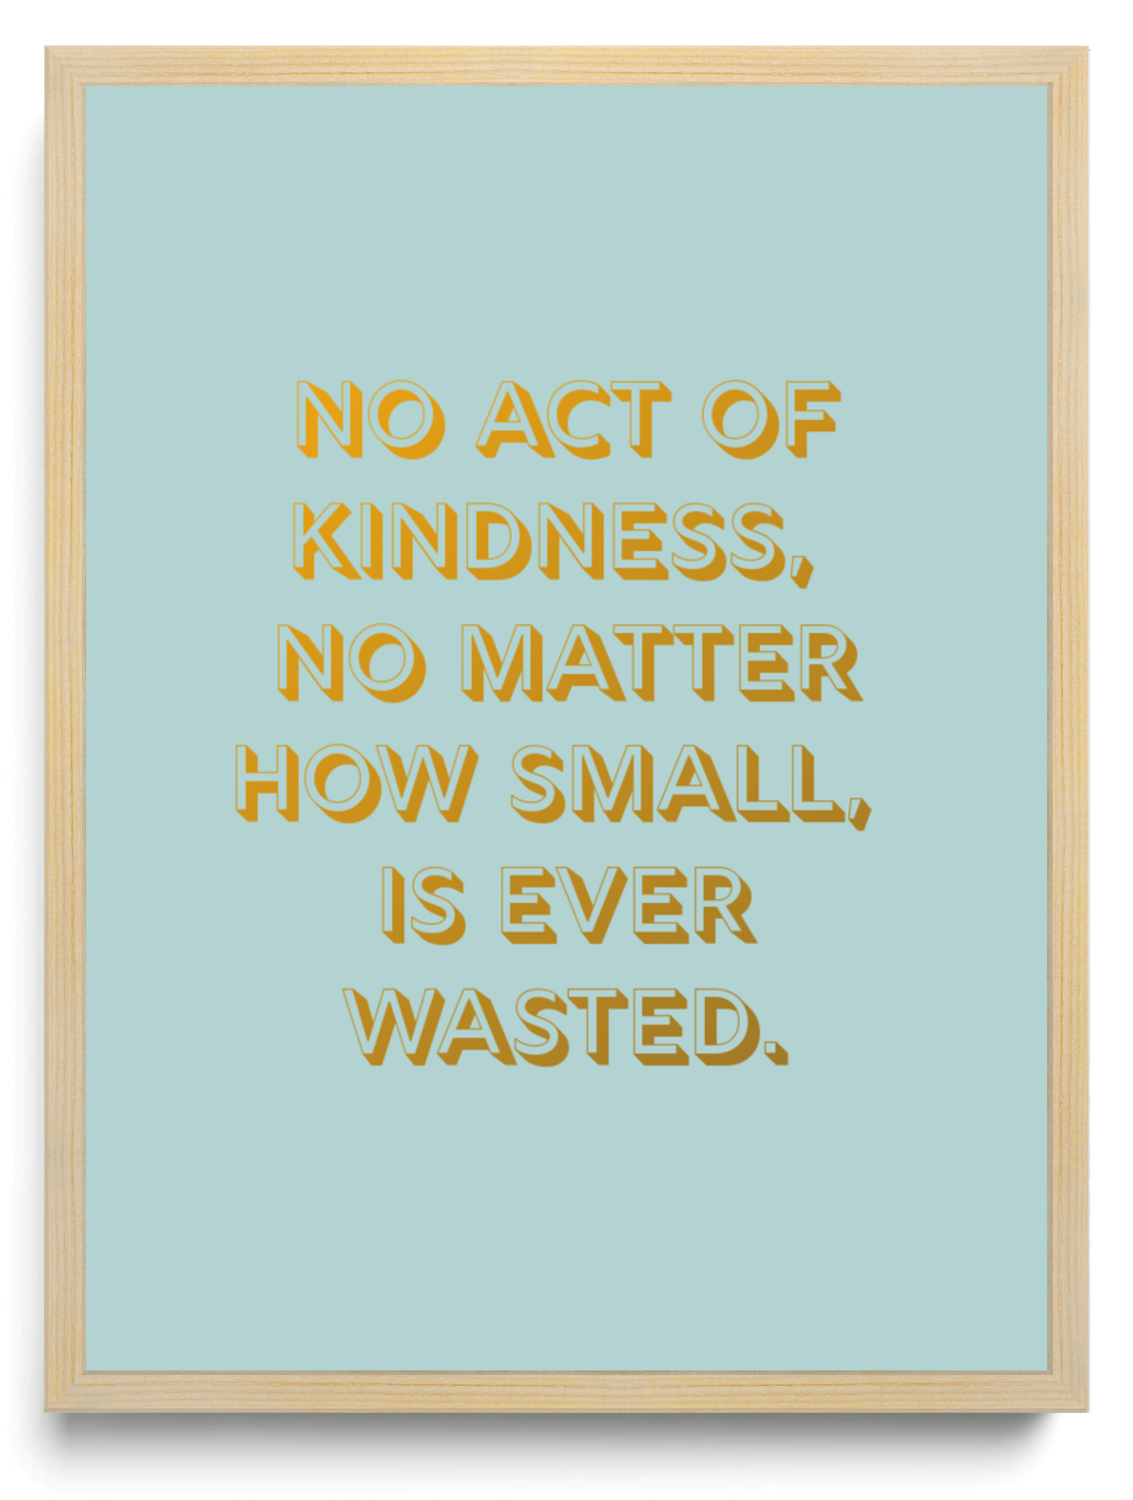 No act of kindness no matter how small is ever wasted framed typographic print